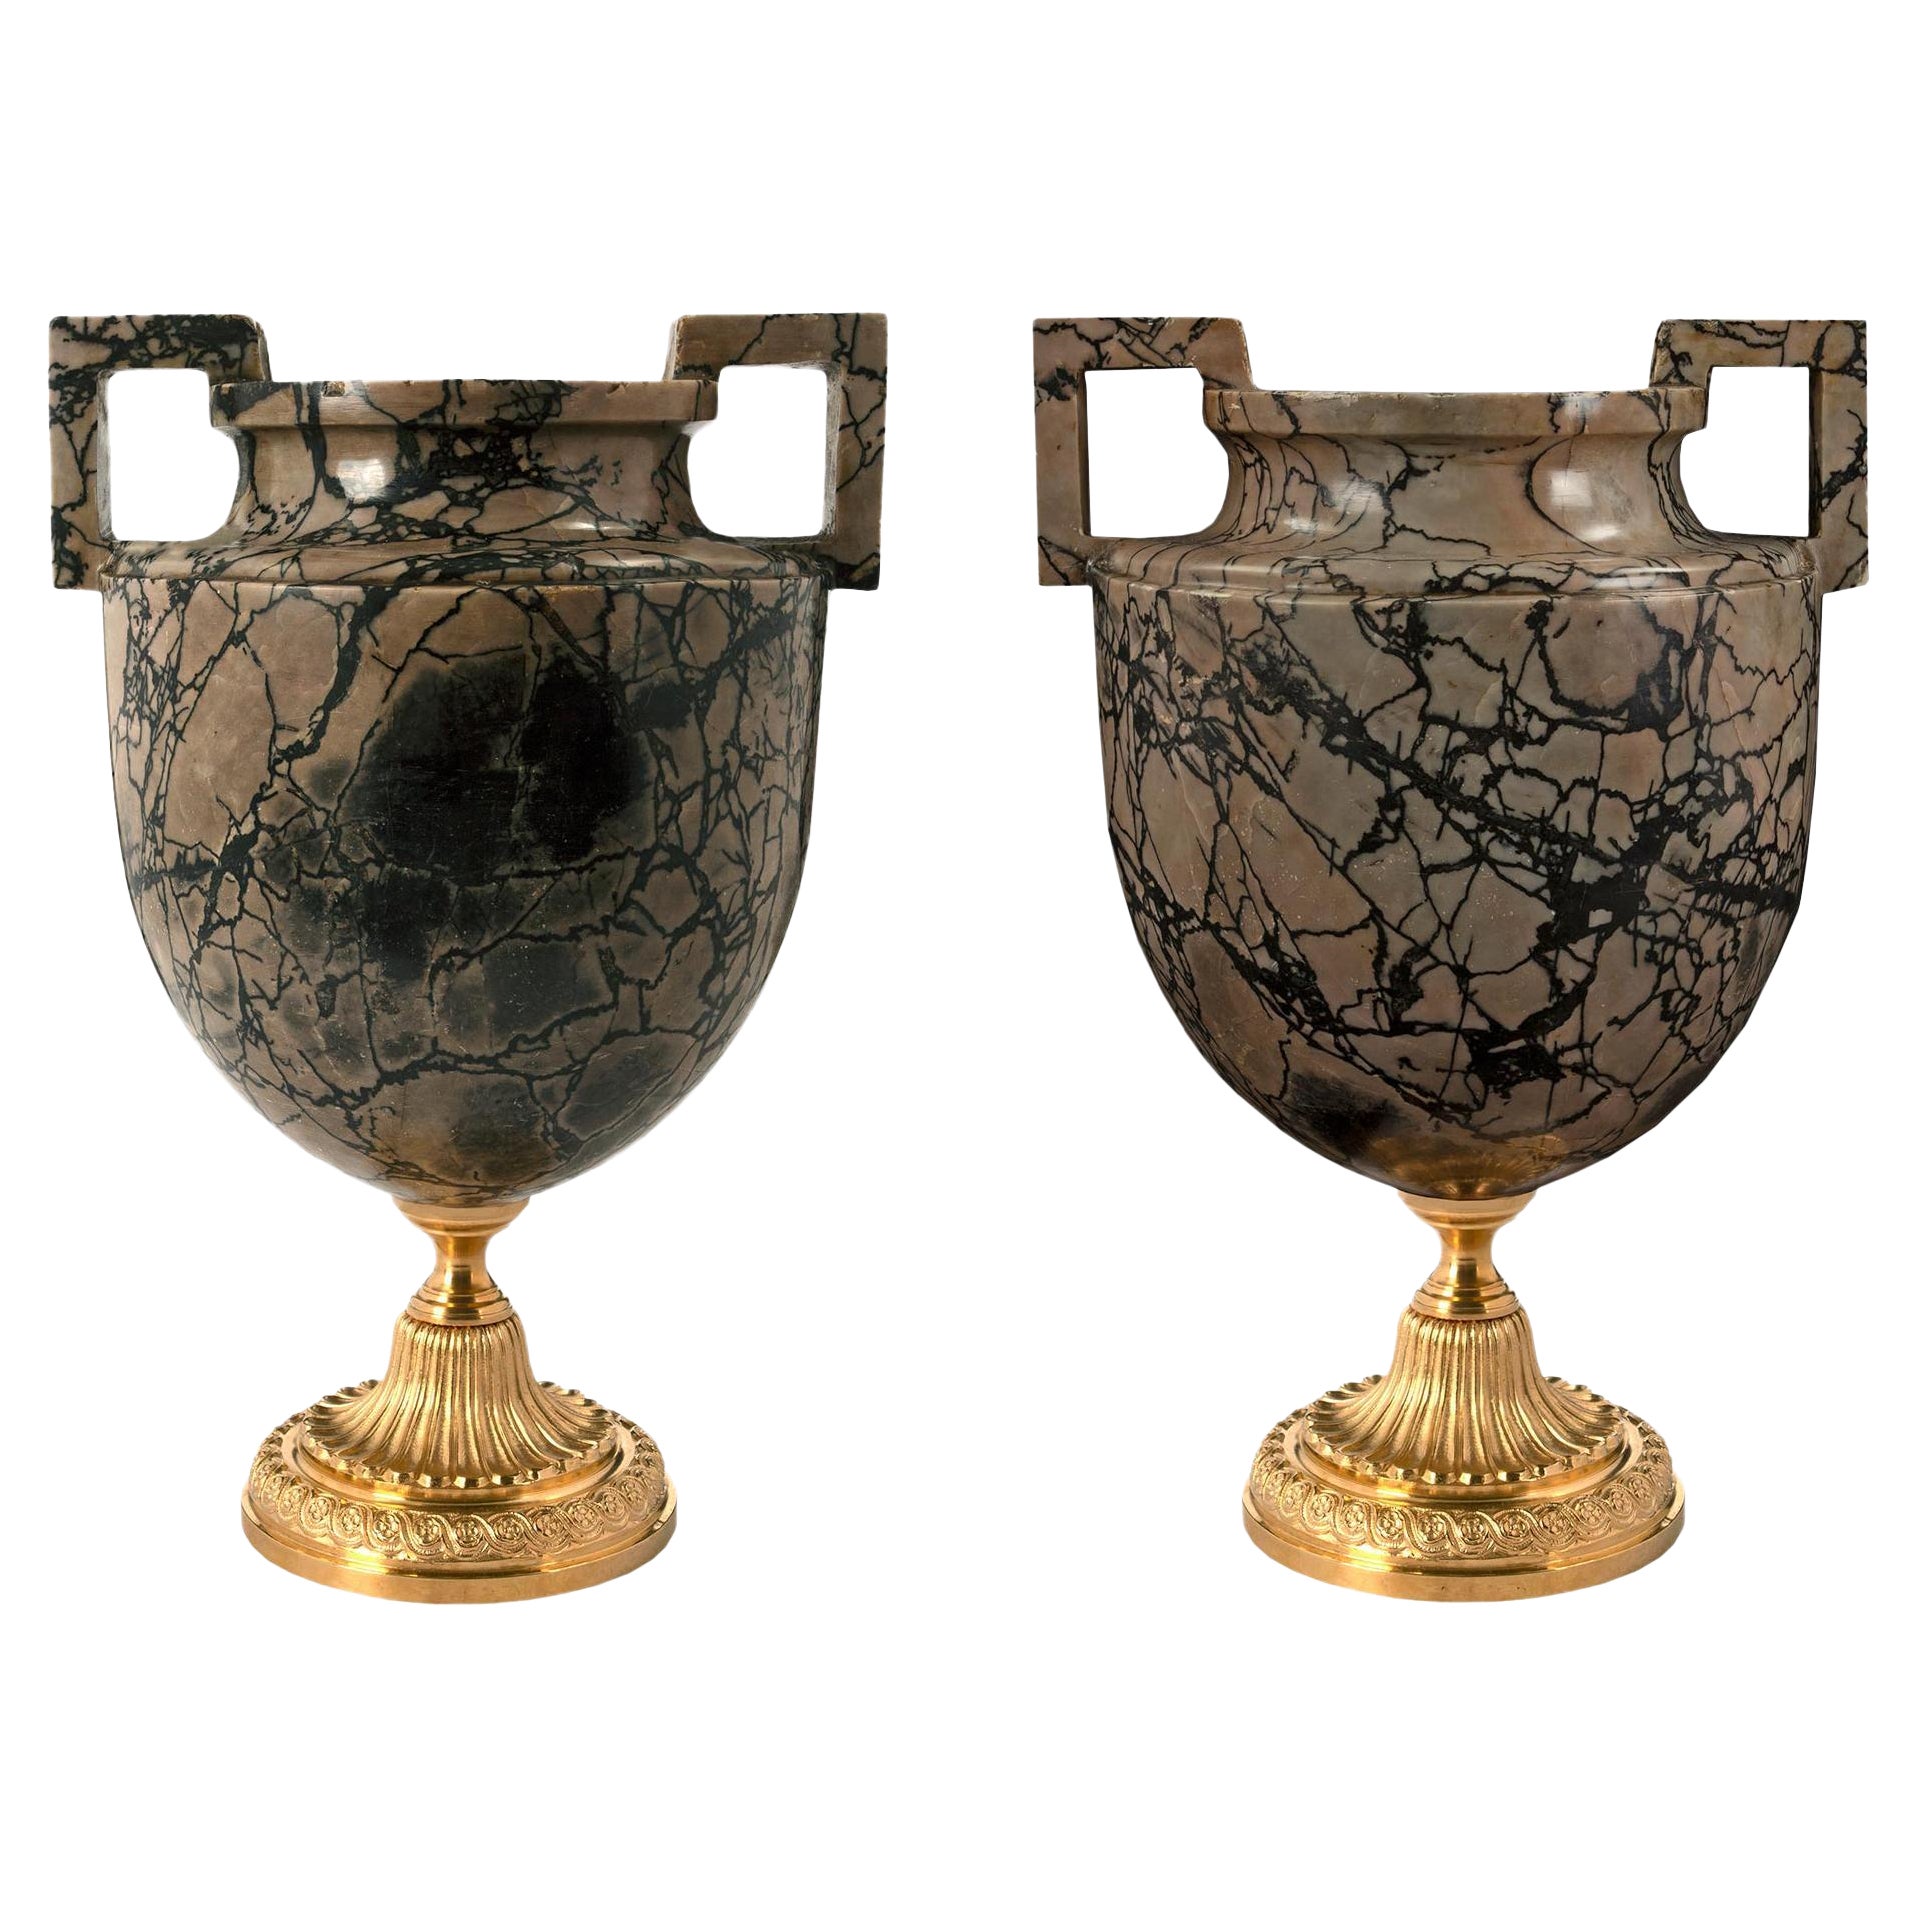 Pair of Italian Mid-19th Century Neoclassical Style Marble and Ormolu Urns For Sale